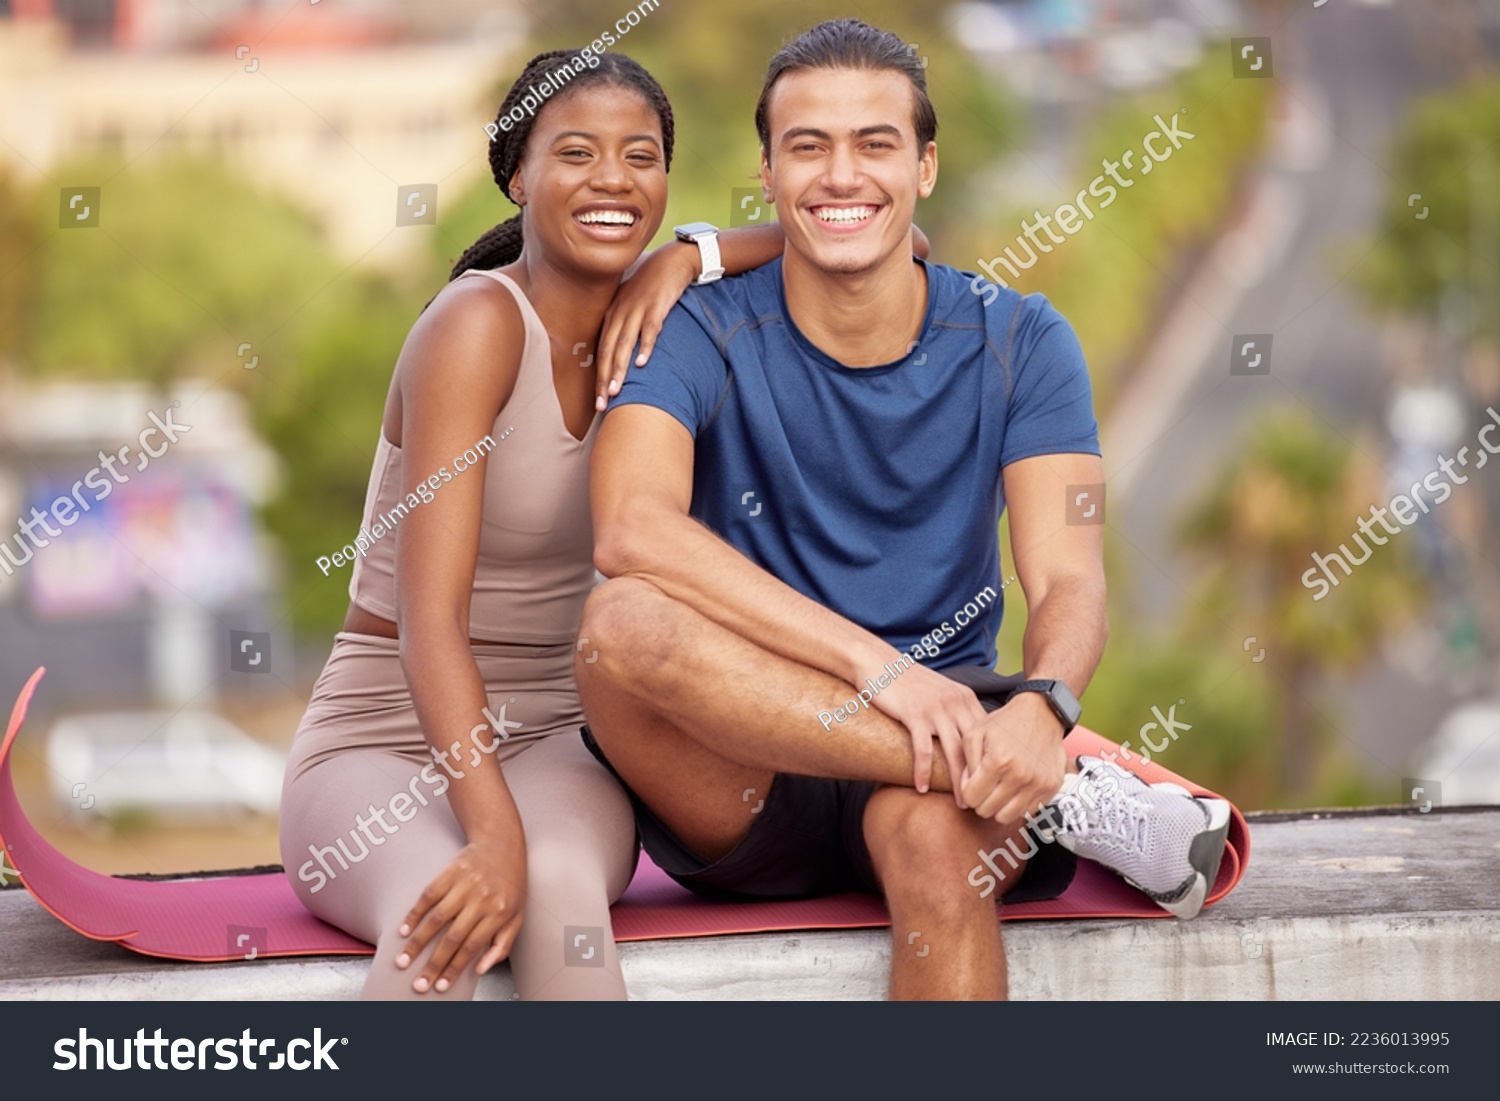 Fitness, yoga and portrait of couple in city on break after stretching, training or workout. Love, interracial couple and man and woman sitting outdoors on mat after pilates exercise for wellness. #2236013995